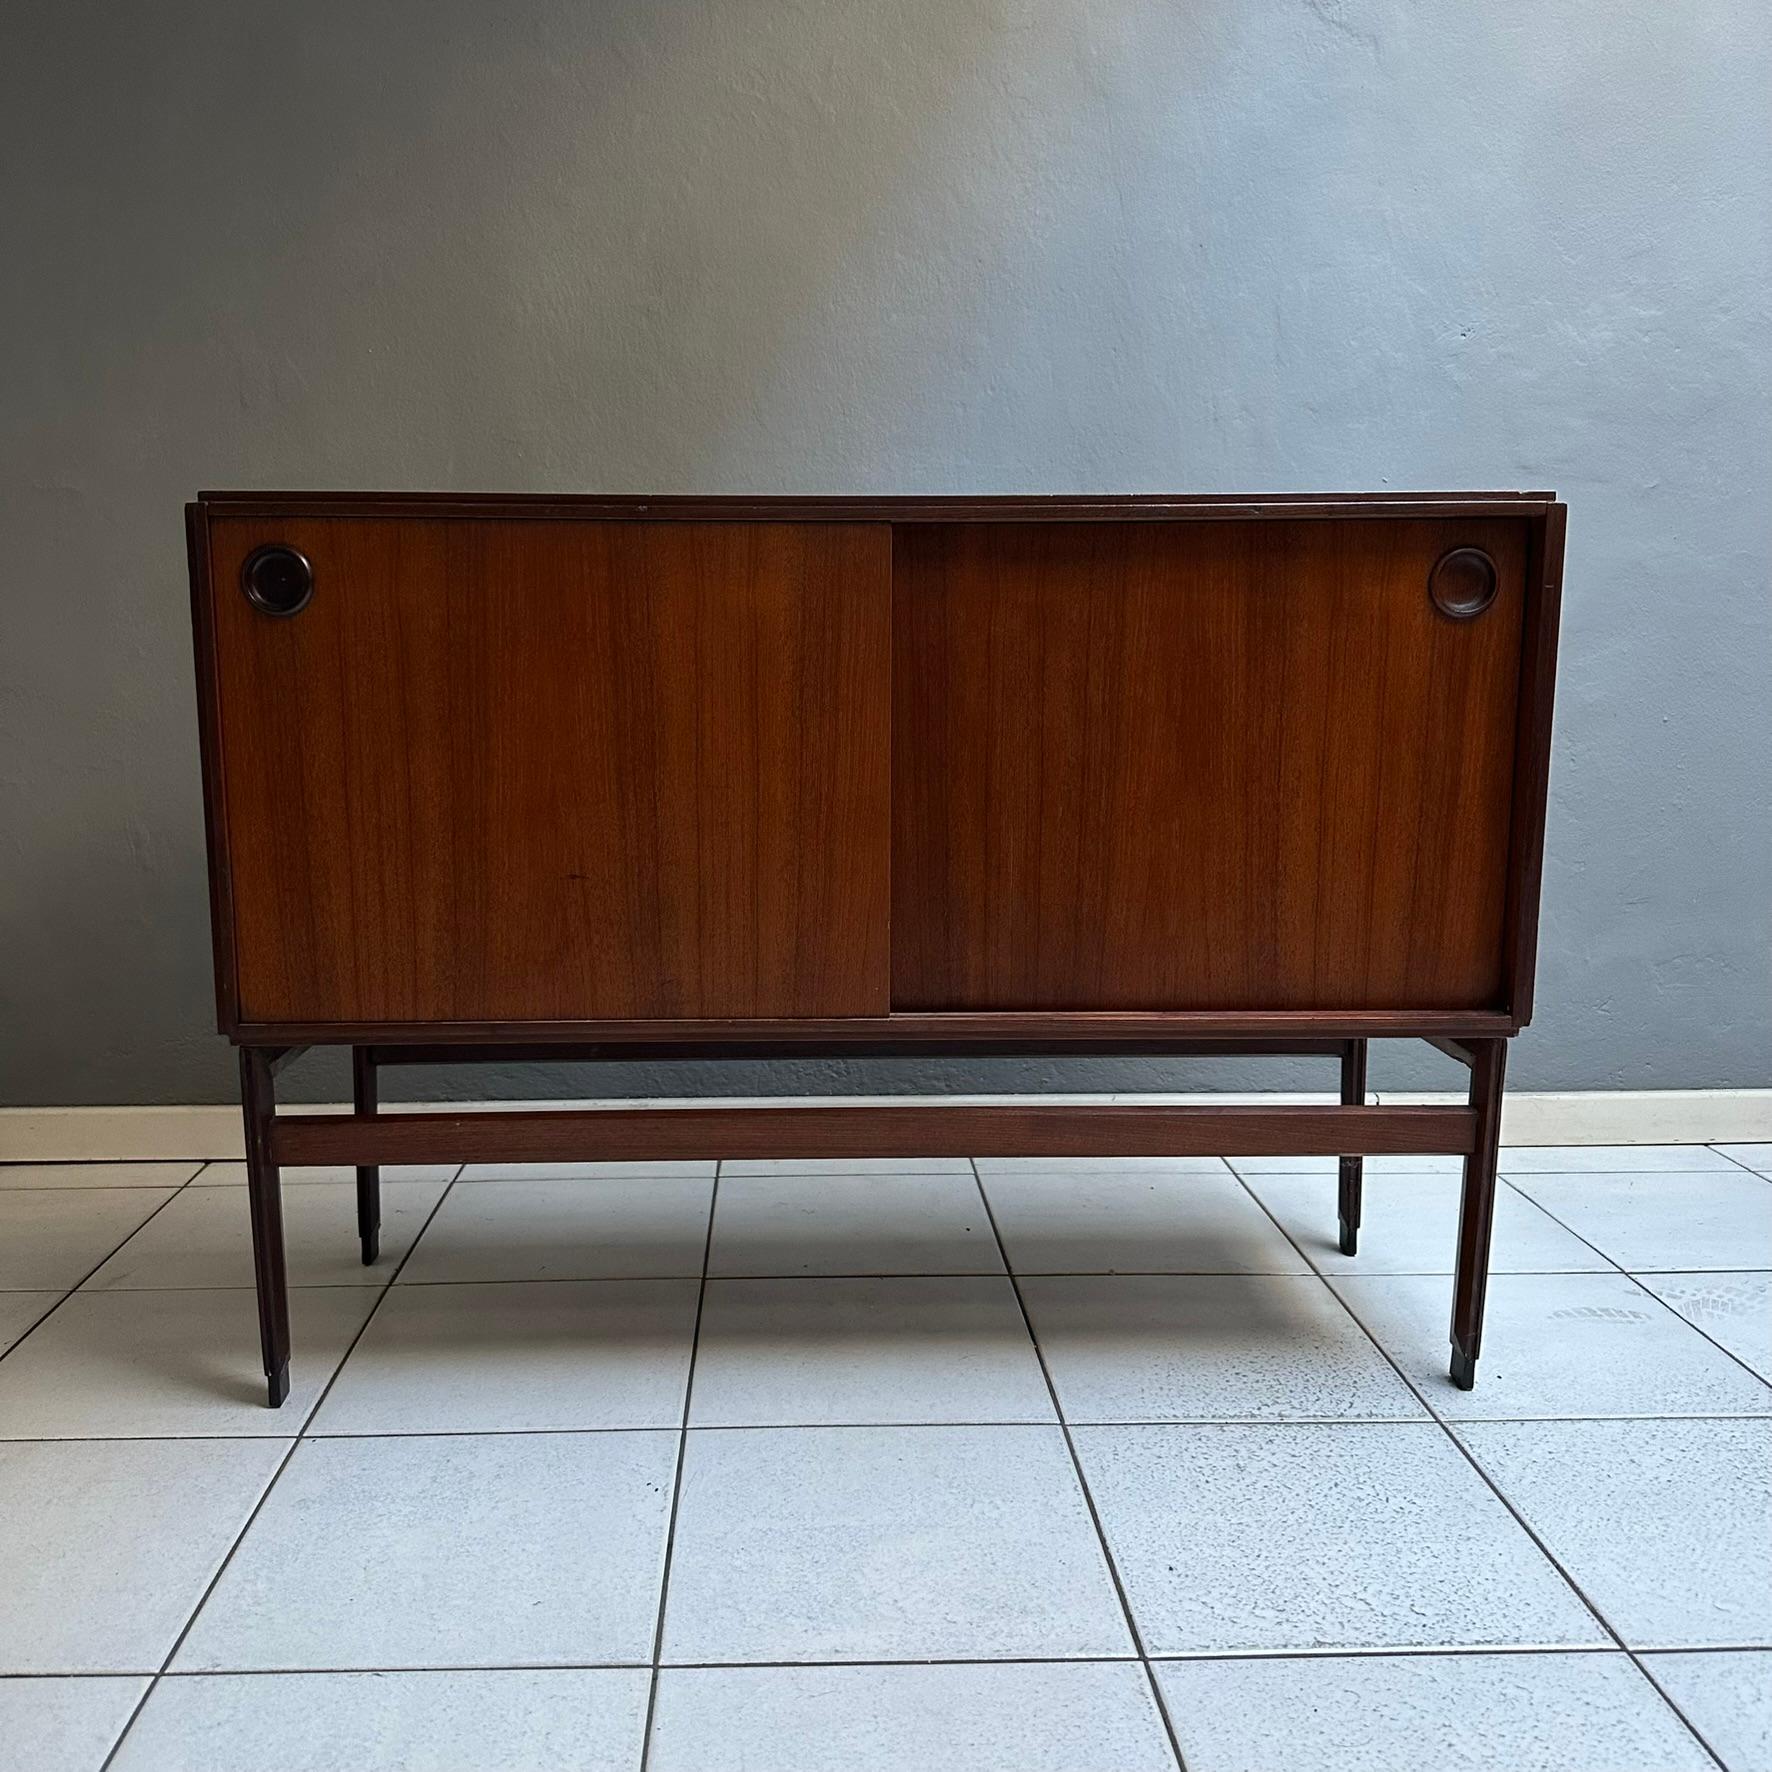 Small vintage sideboard from the 1960s, Italian manufacturing, in teak.
Given its dimensions and simple design, the piece of furniture fits perfectly into any space.
Two sliding doors with a central shelf inside for both parts.